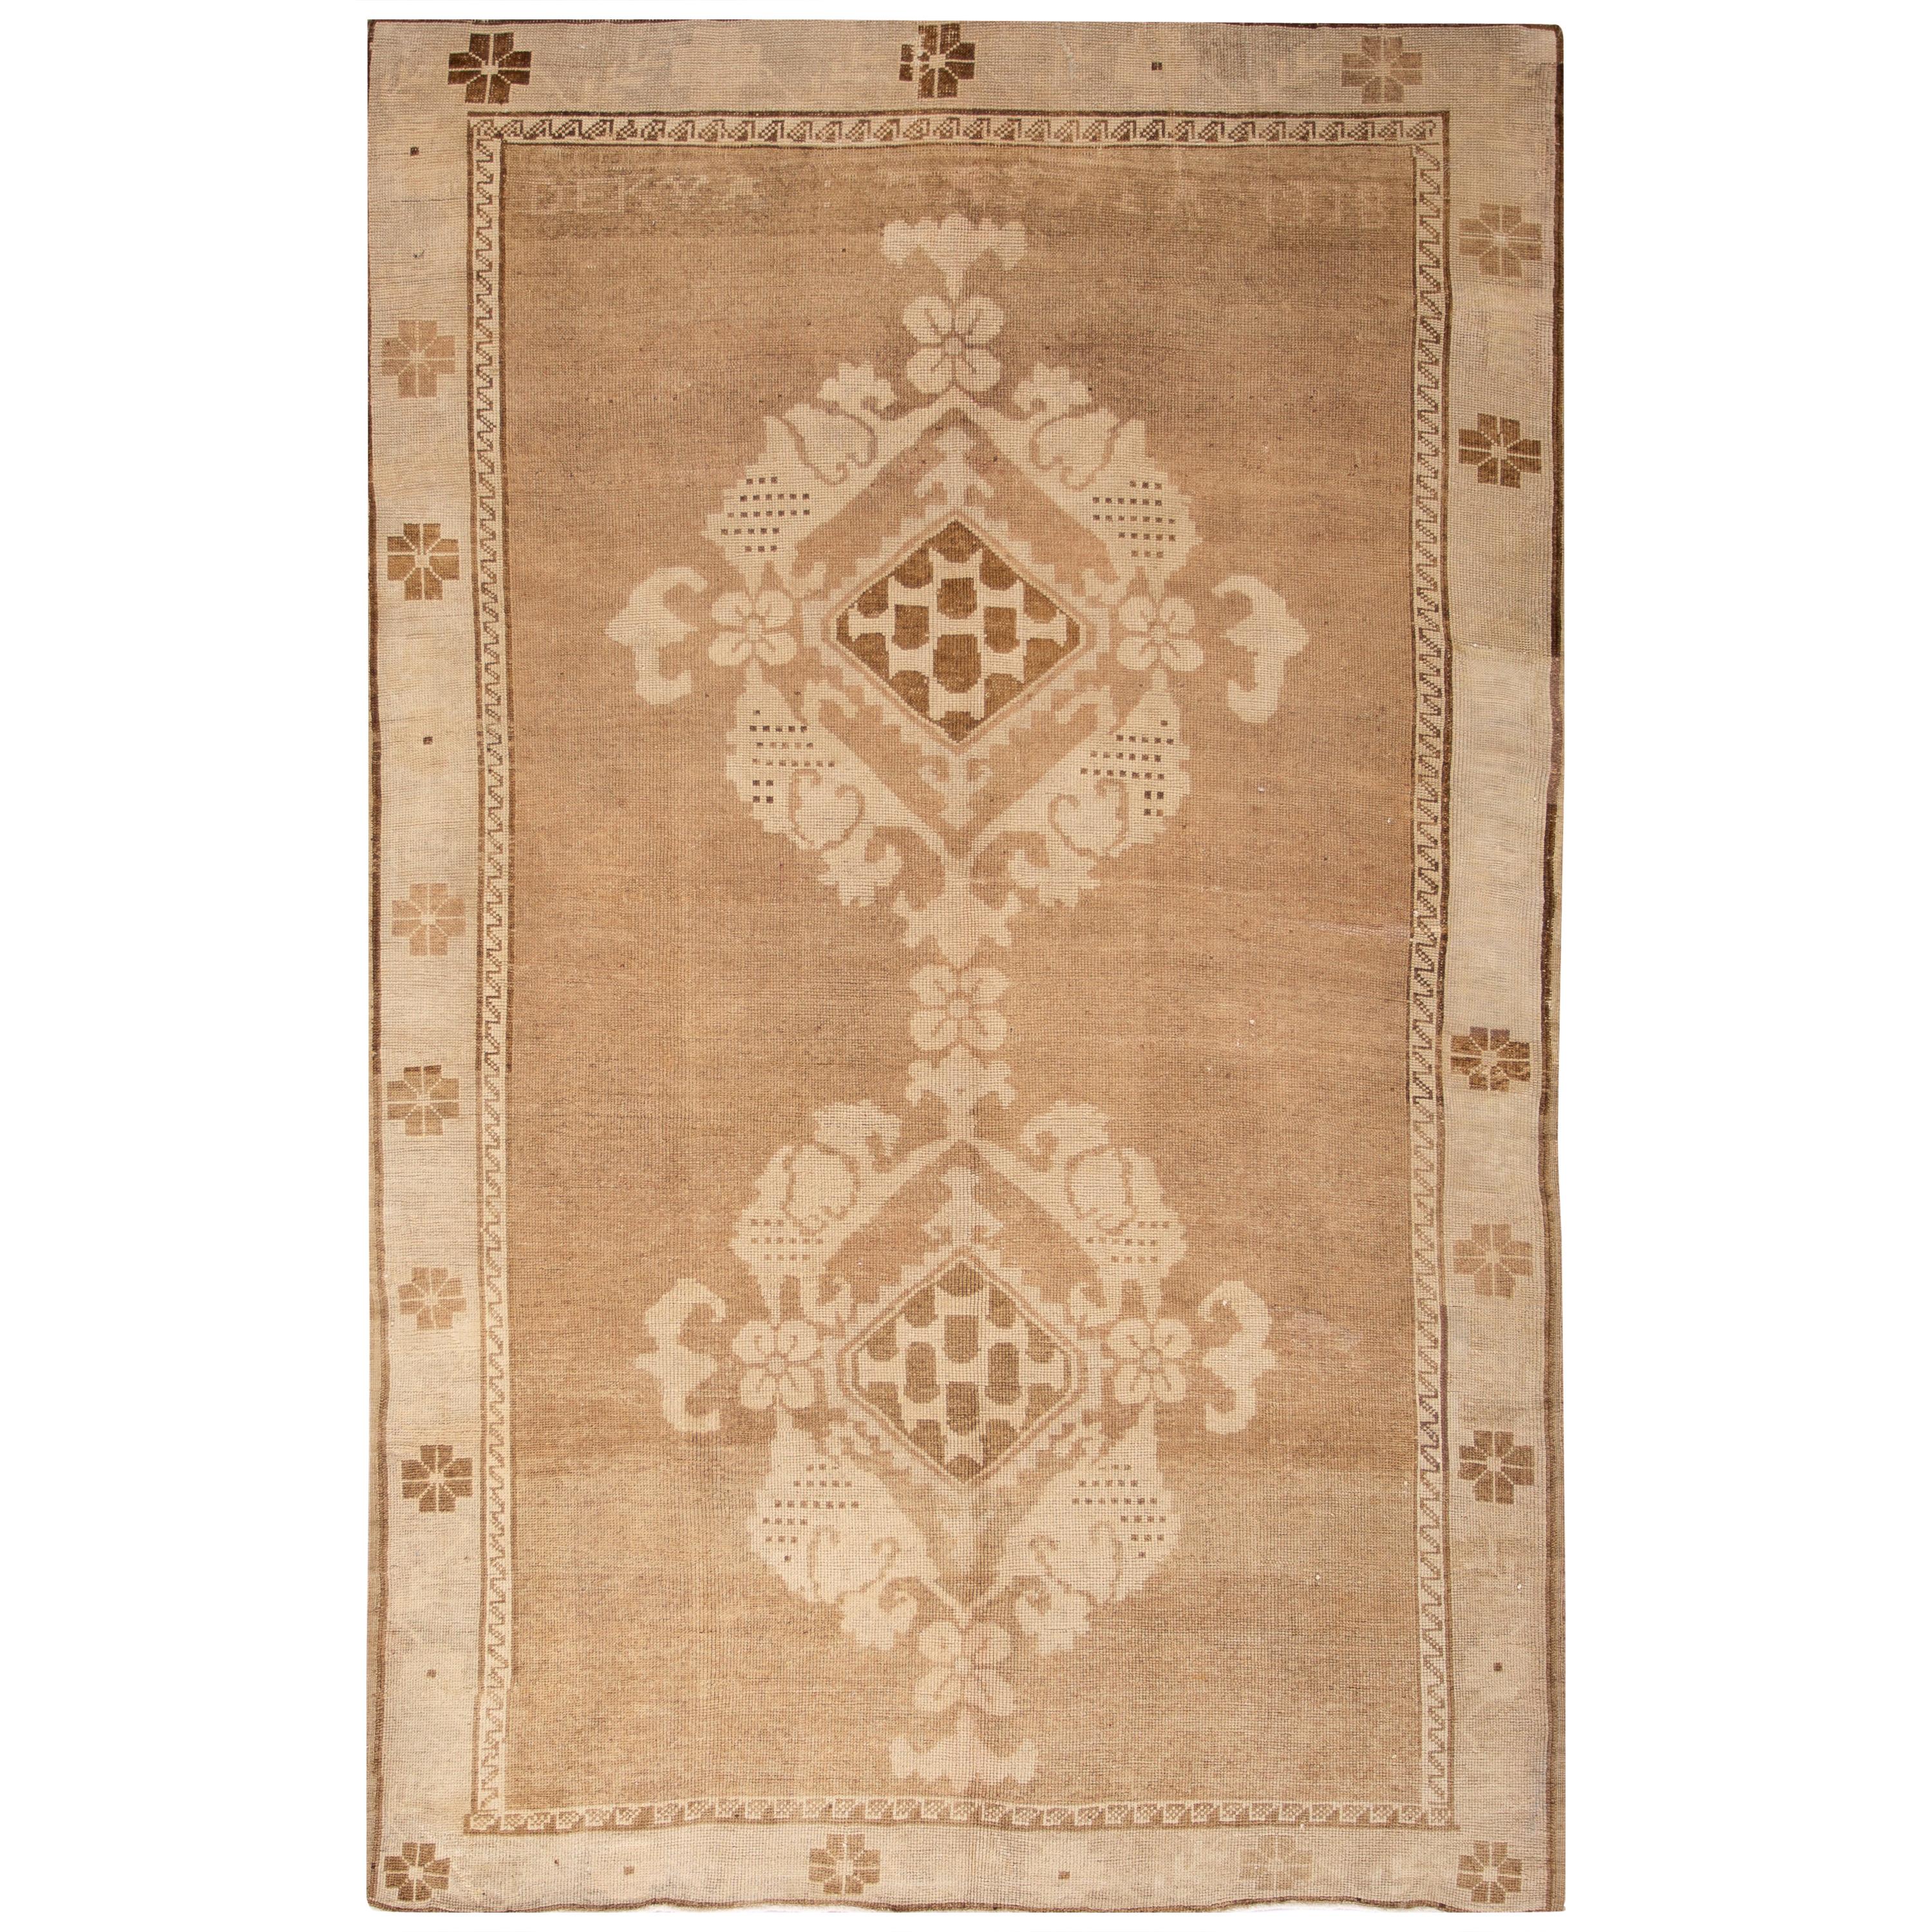 Early 20th Century Brown Antique Khotan Wool Rug with Medallion Design For Sale